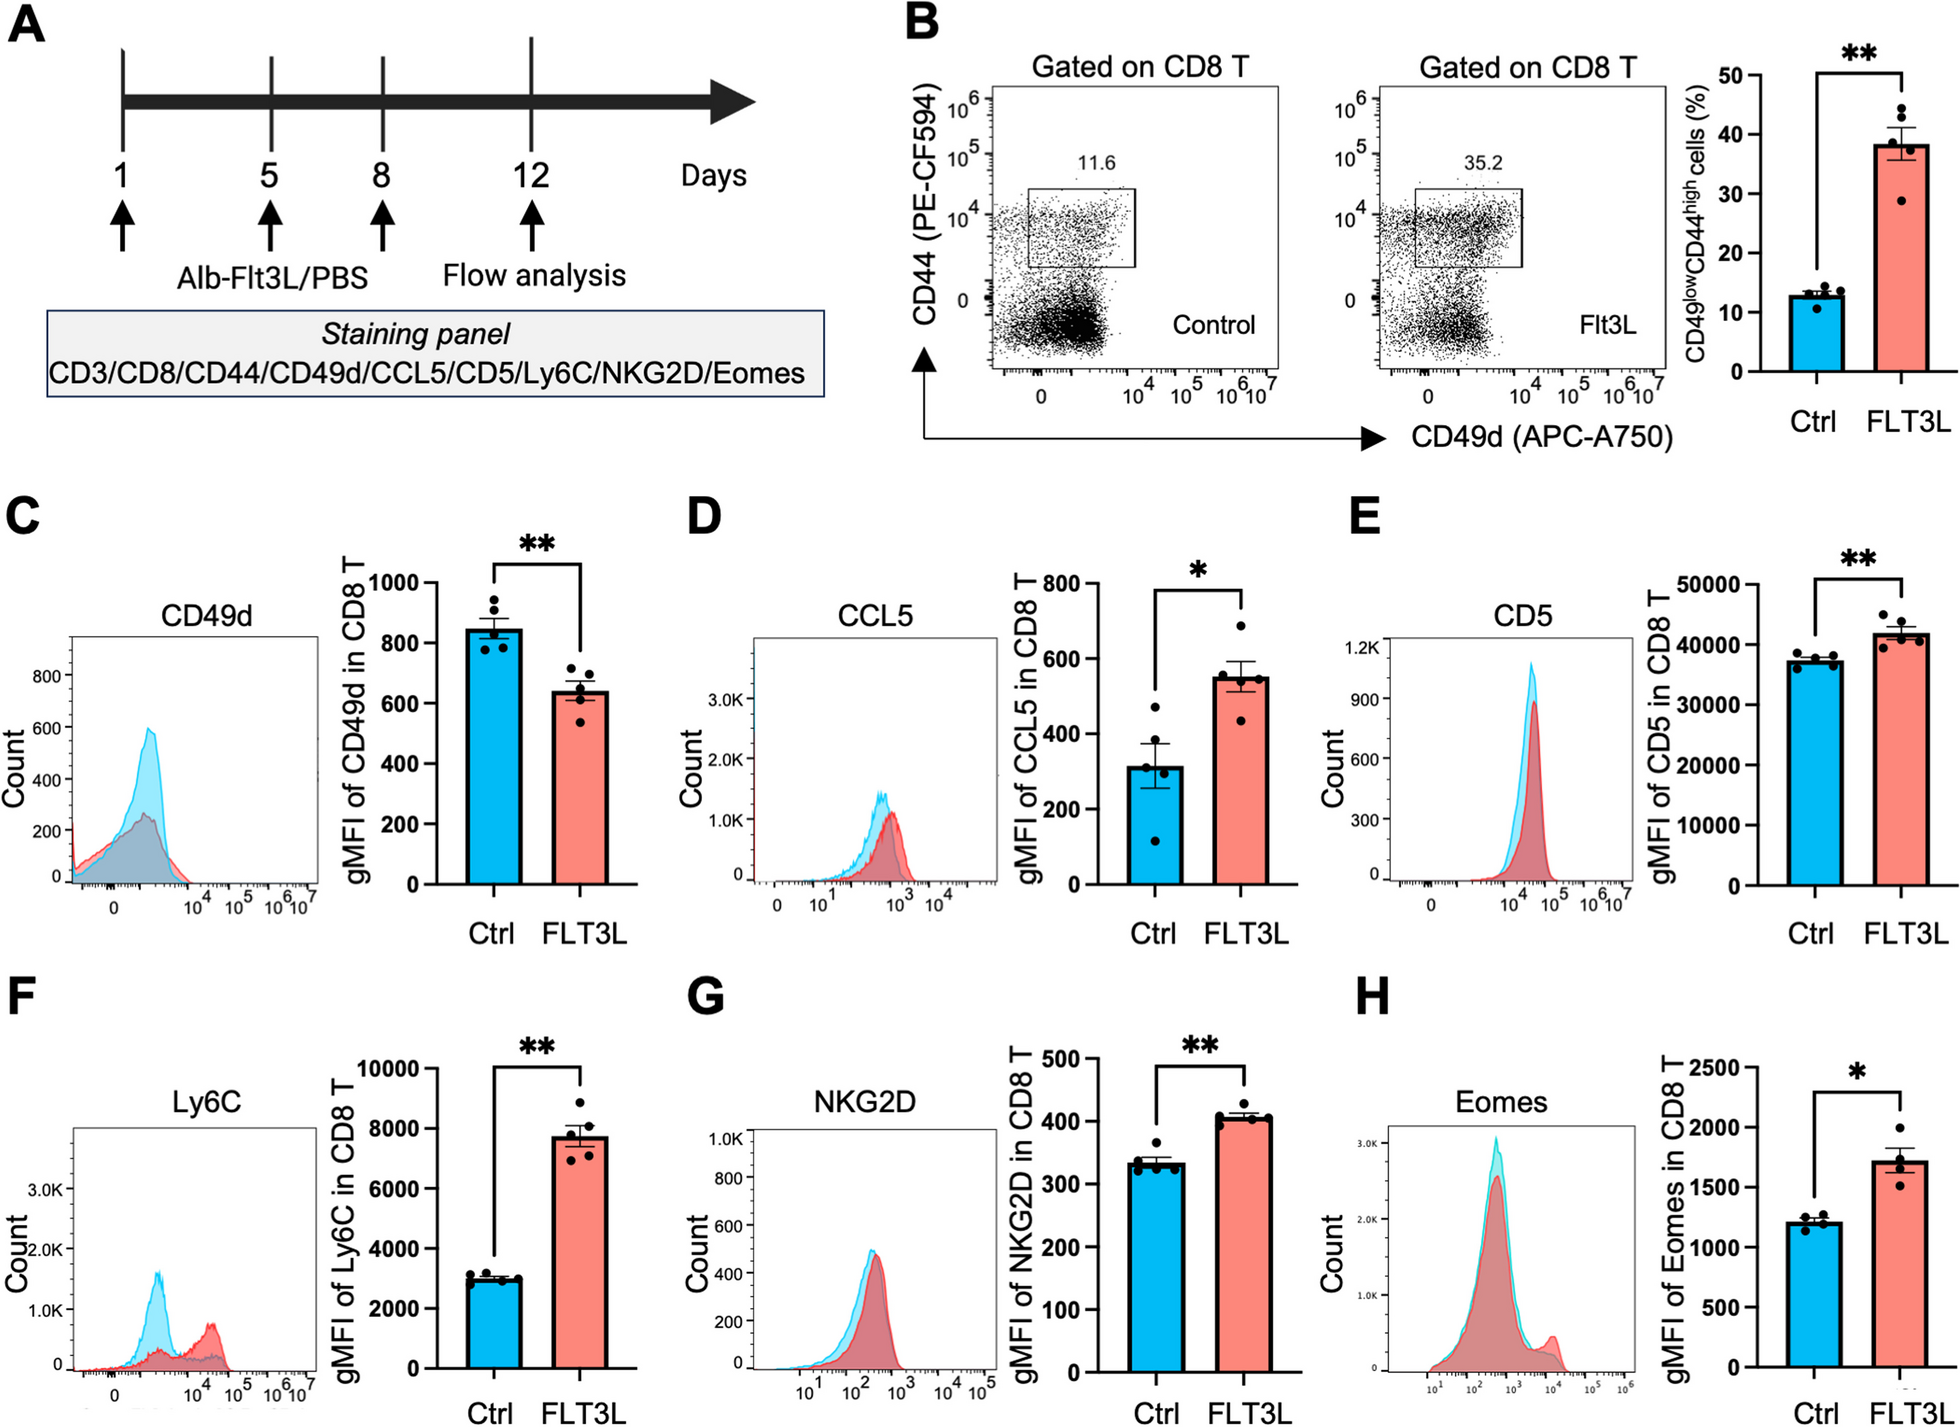 FLT3L-induced virtual memory CD8 T cells engage the immune system against tumors